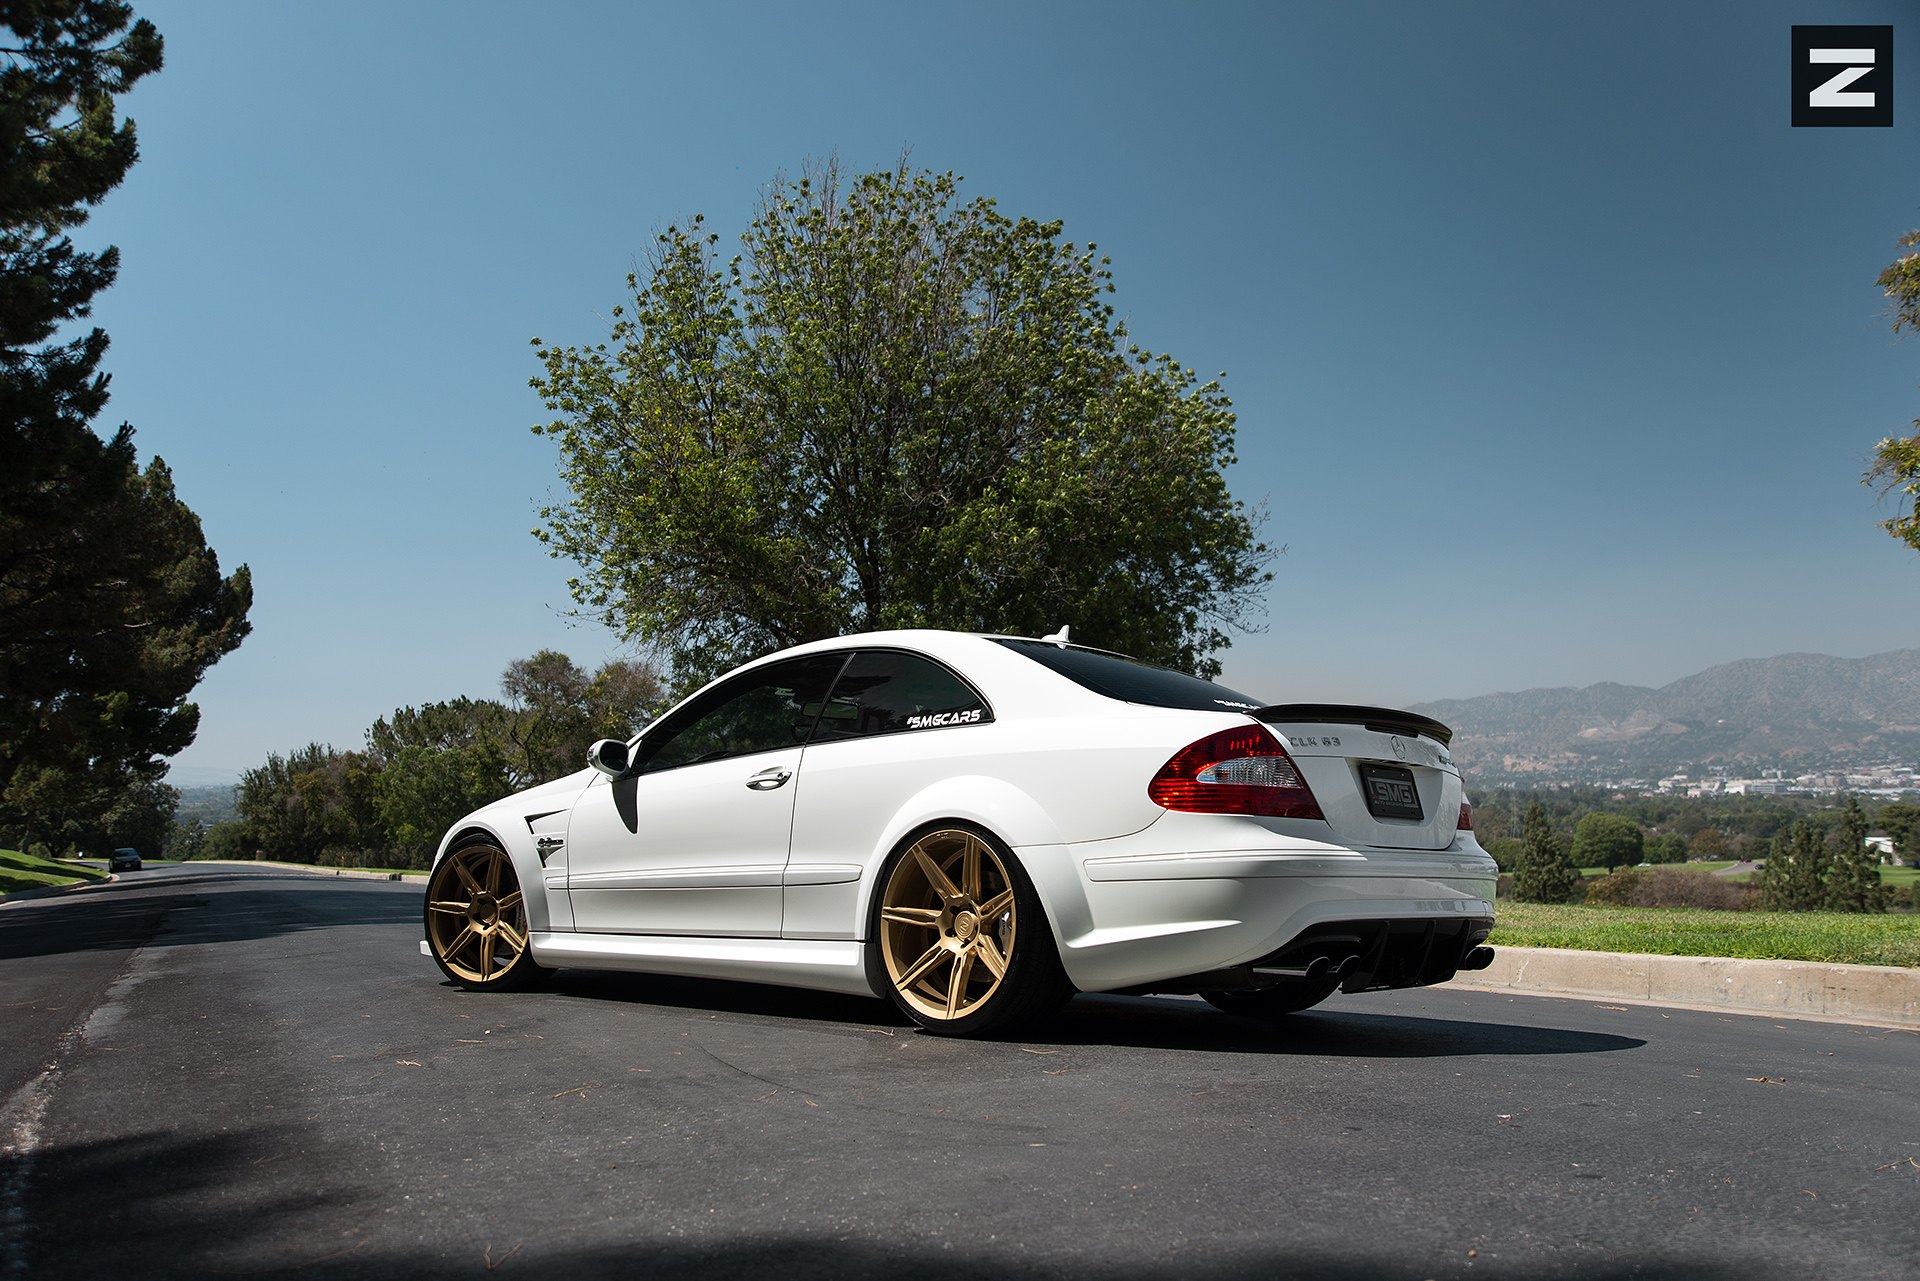 Factory Style Rear Lip Spoiler on White Mercedes CLK Class - Photo by Zito Wheels